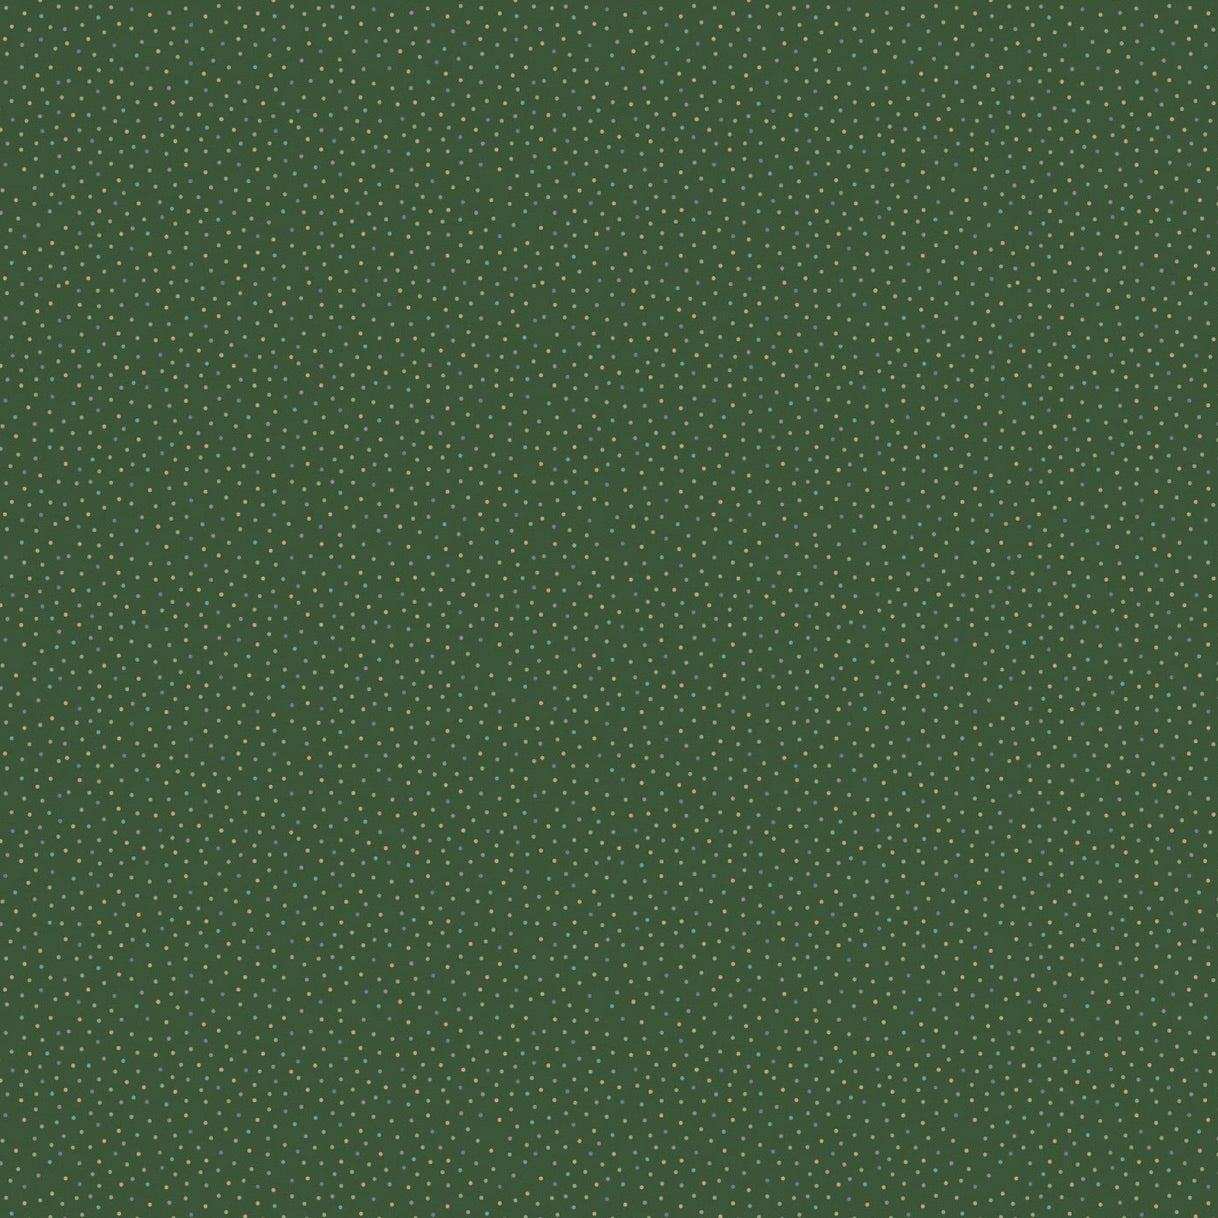 Country Confetti, Fairway Green Dark Green, CC20231, sold by the 1/2 yard, NEW!